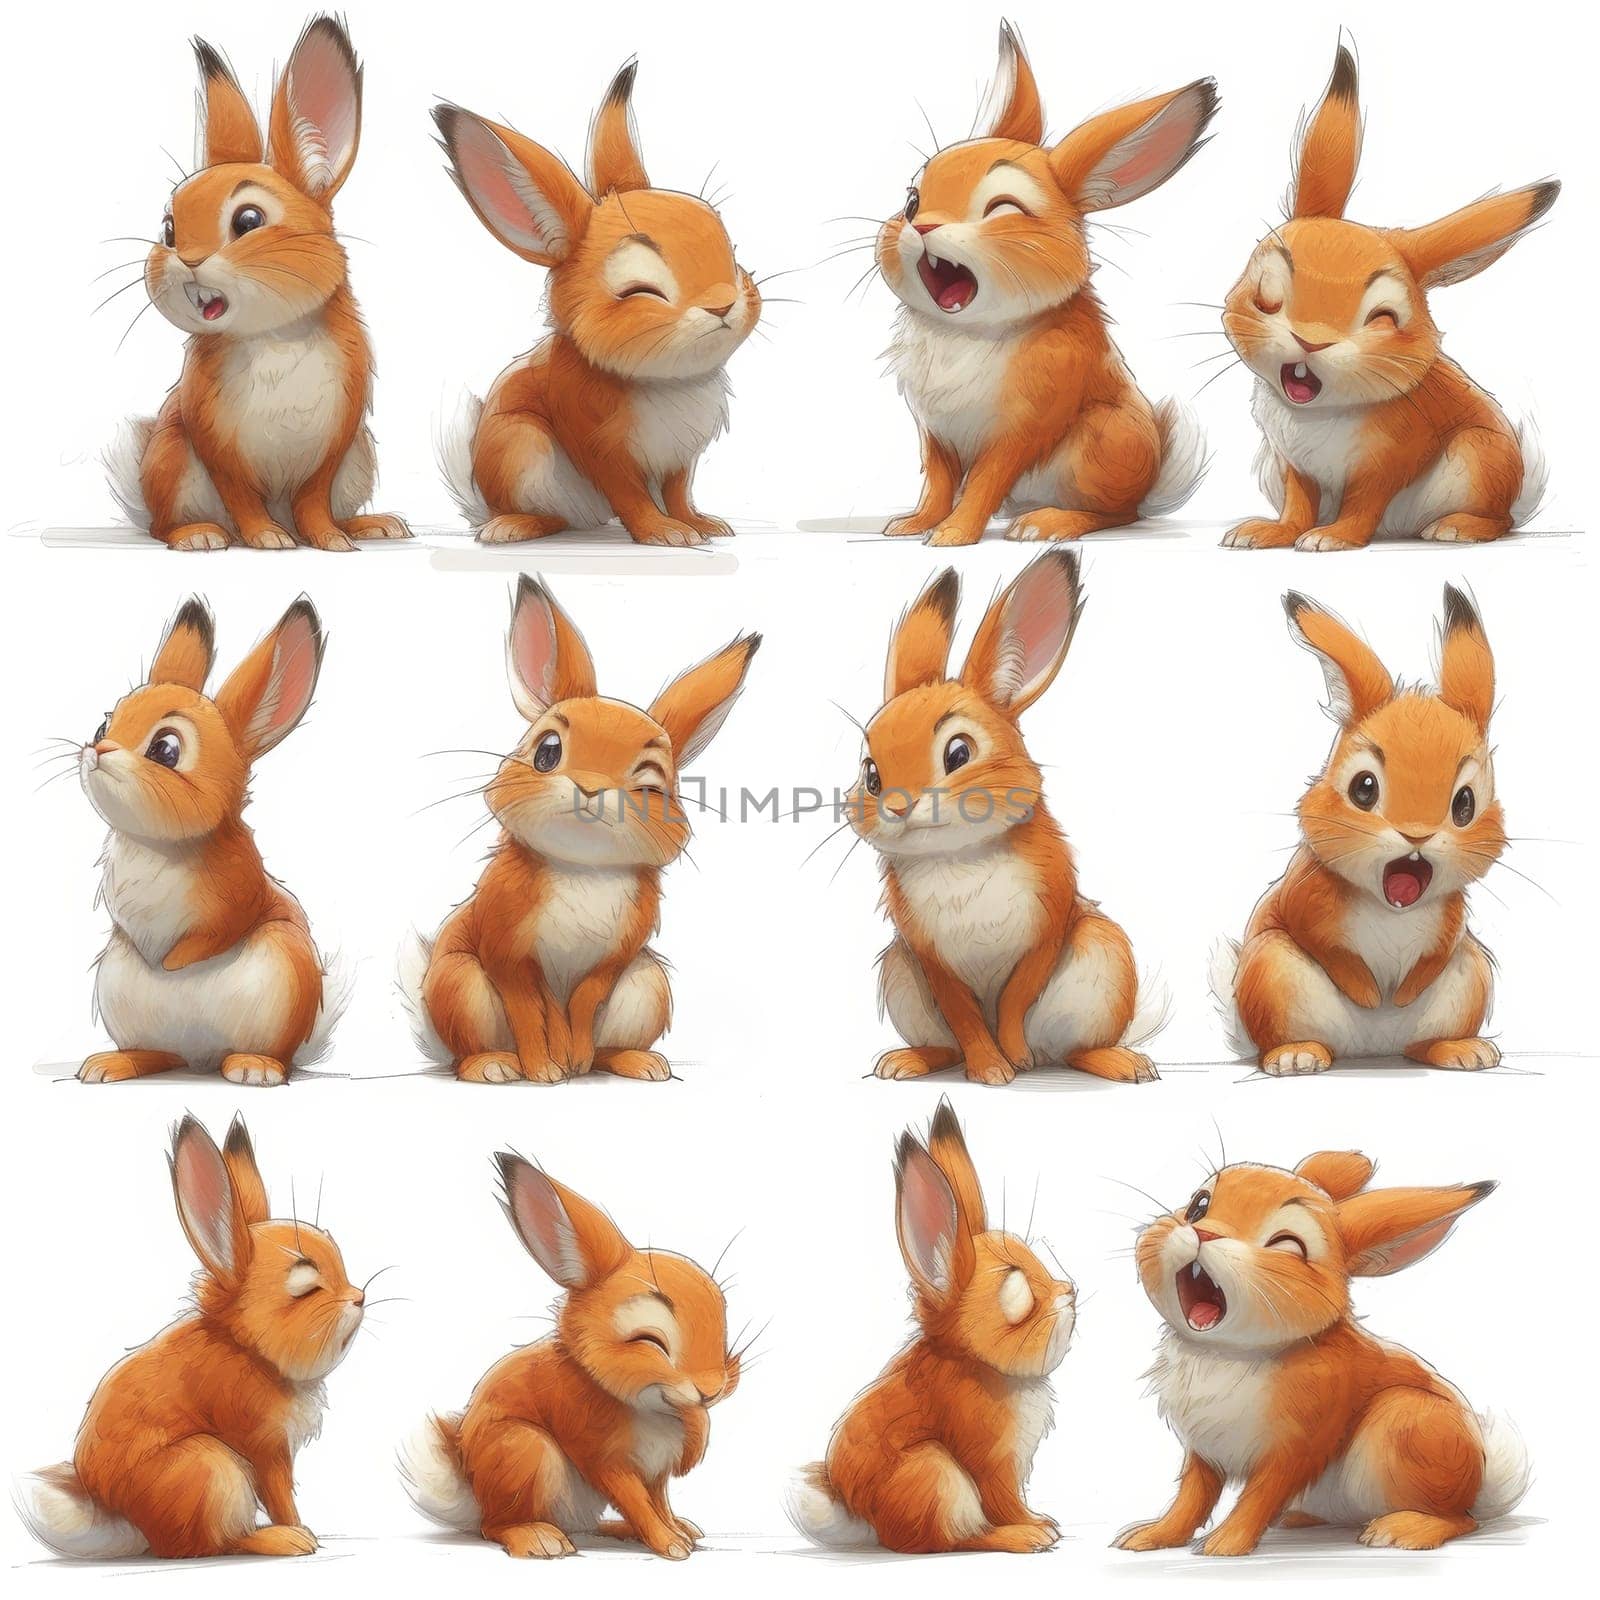 A set of adorable cute red rabbits on a white background.